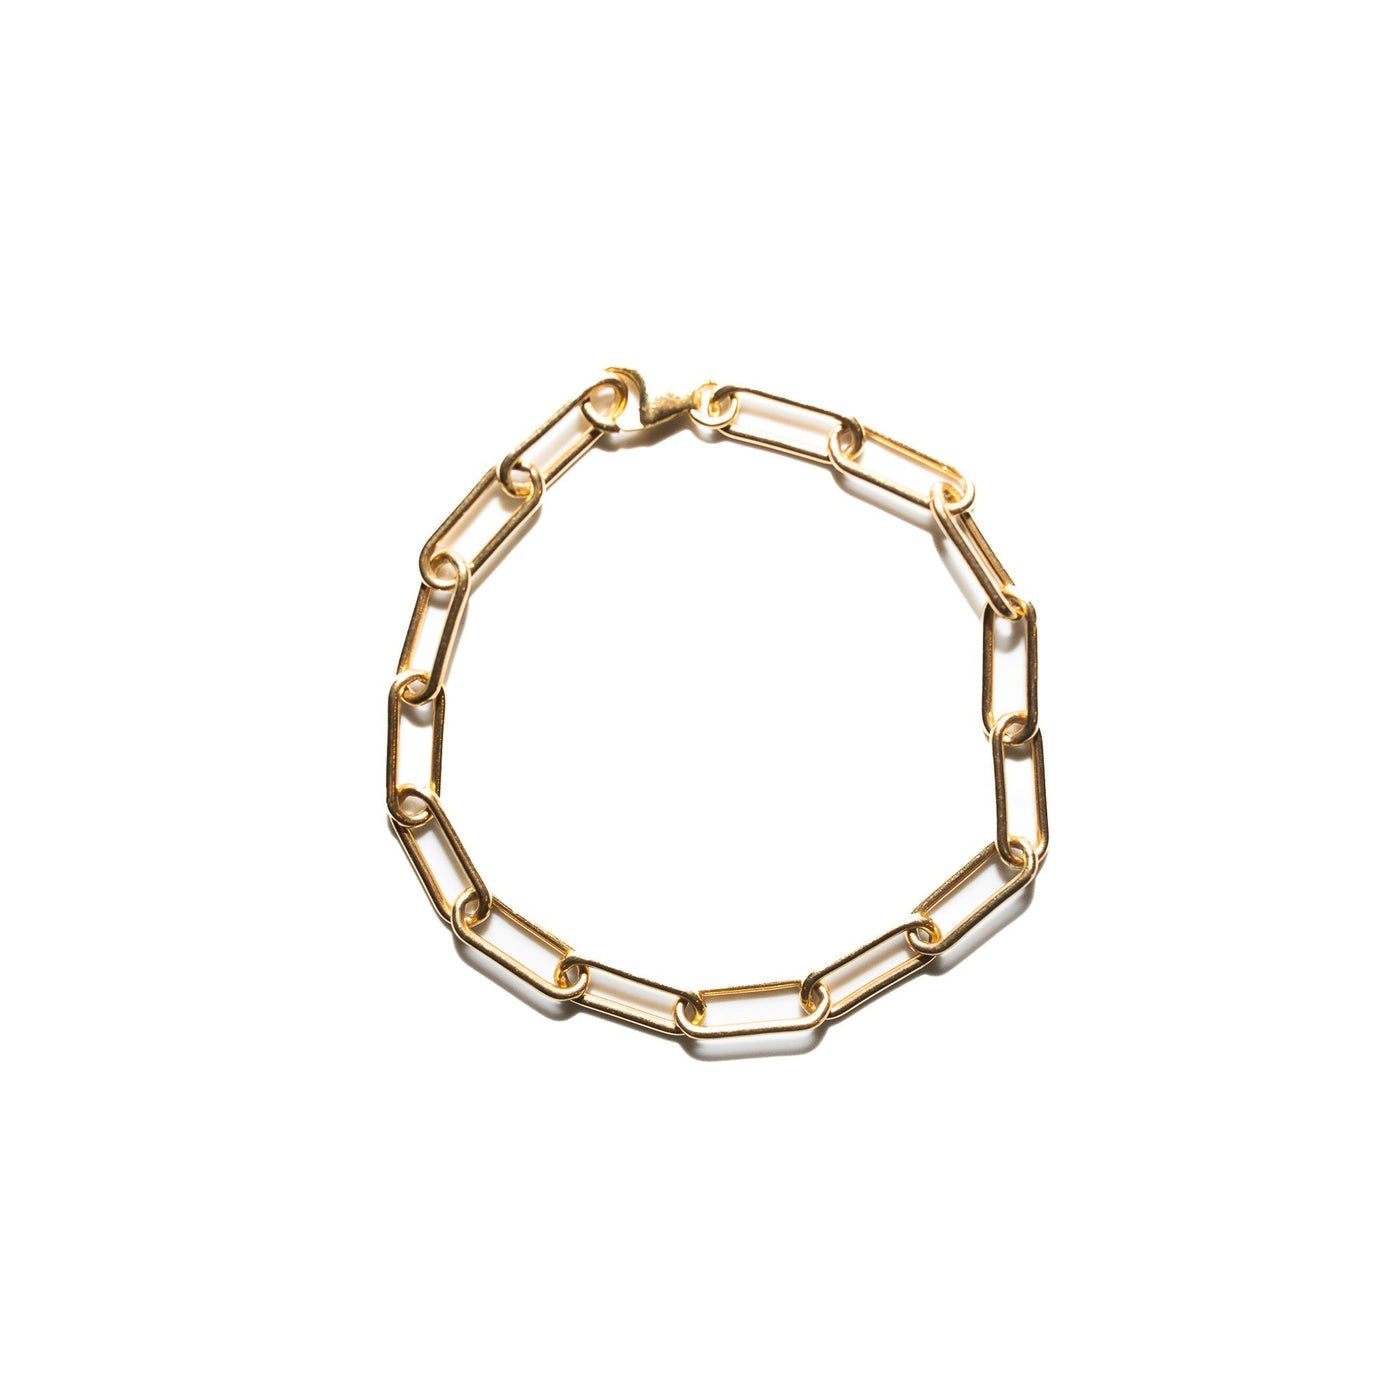 14K Yellow Gold Filled Paperclip Bracelet 03.